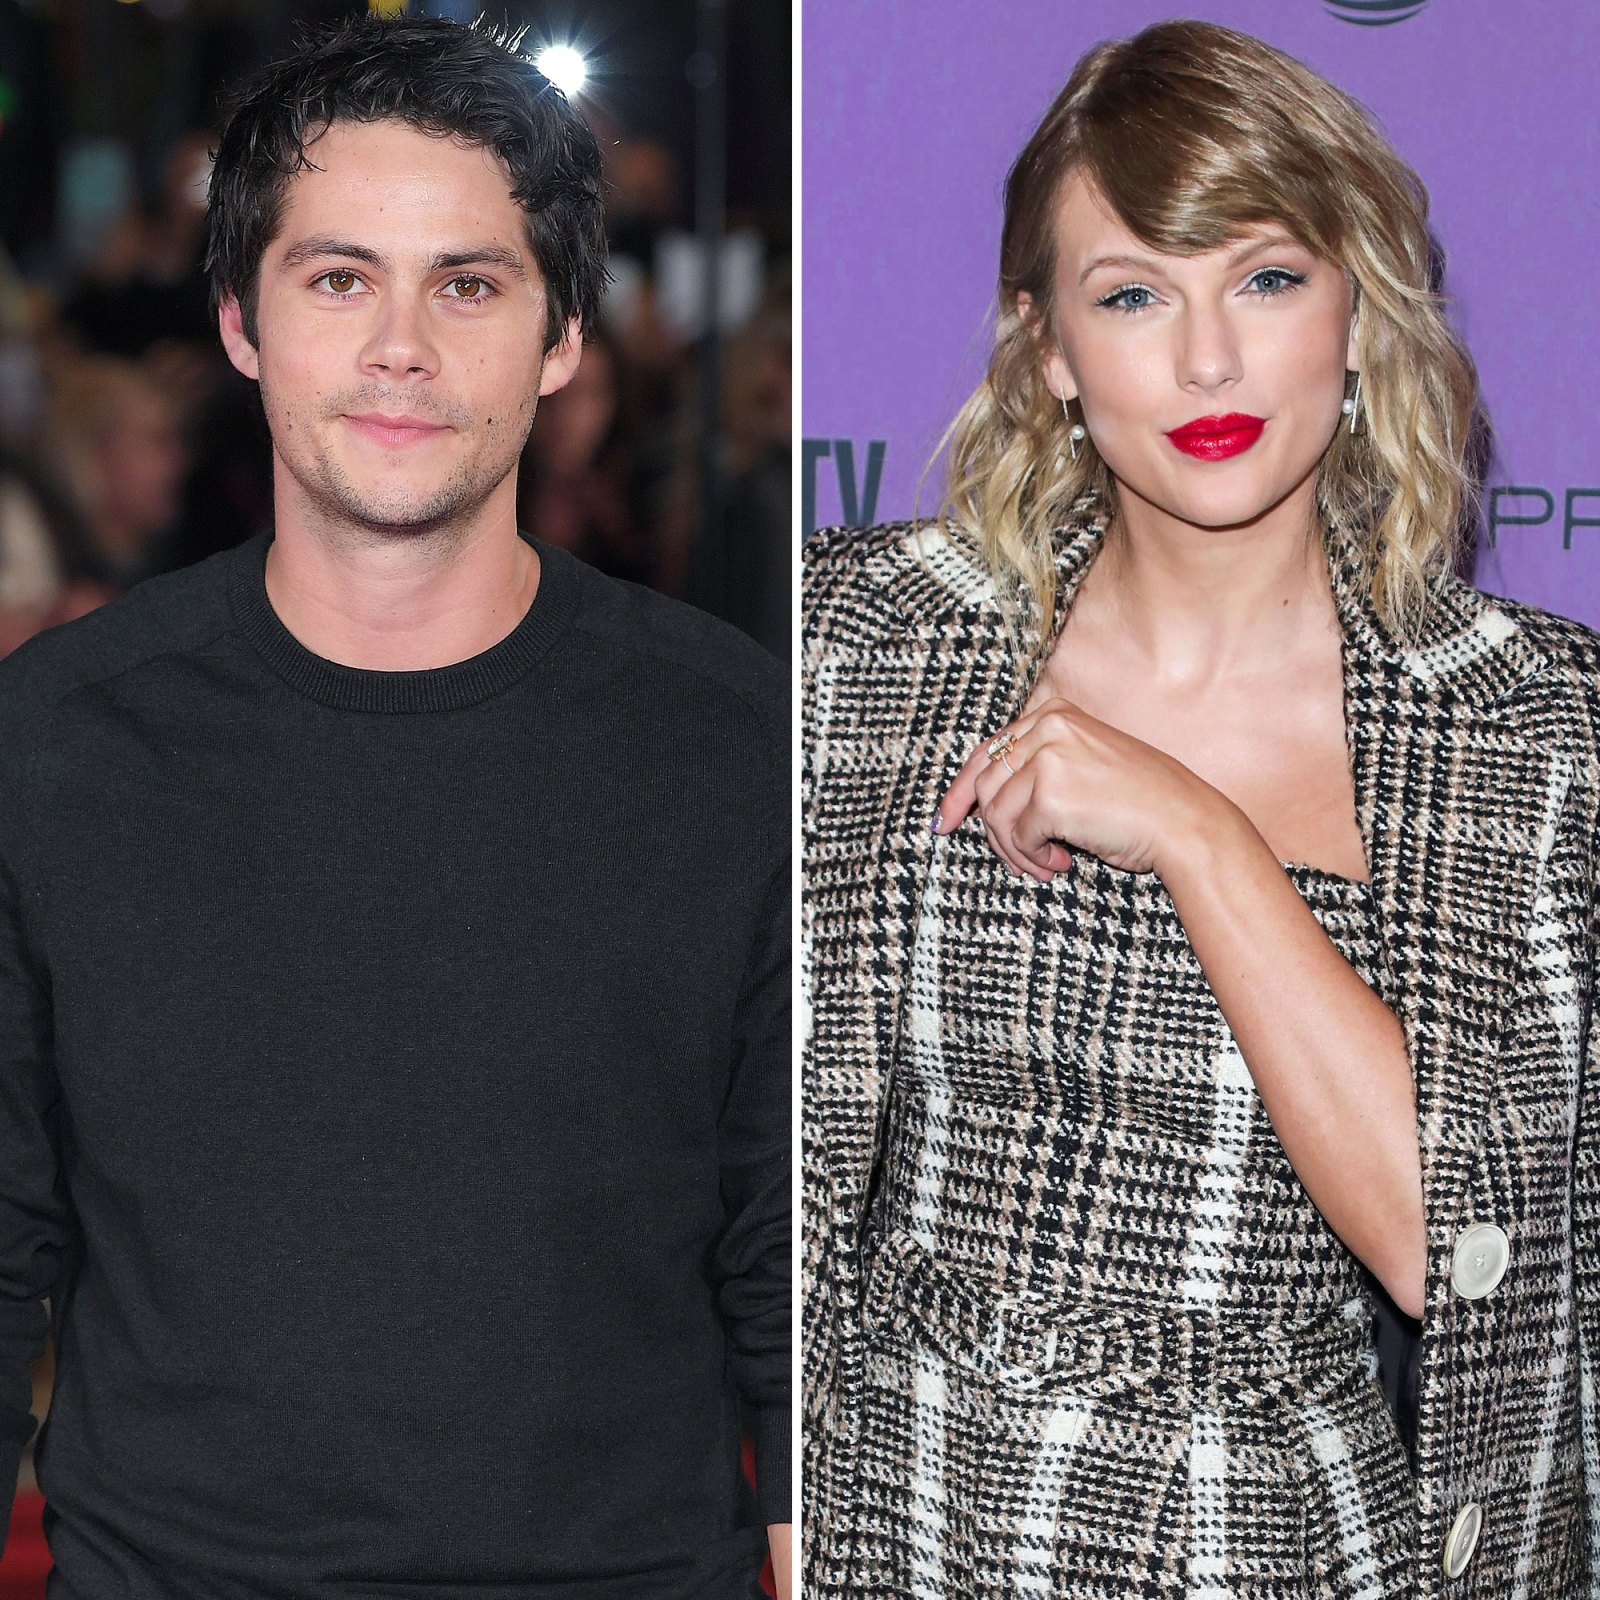 Big Fan Dylan OBrien Shared Love Taylor Swift Before All Too Well Gig